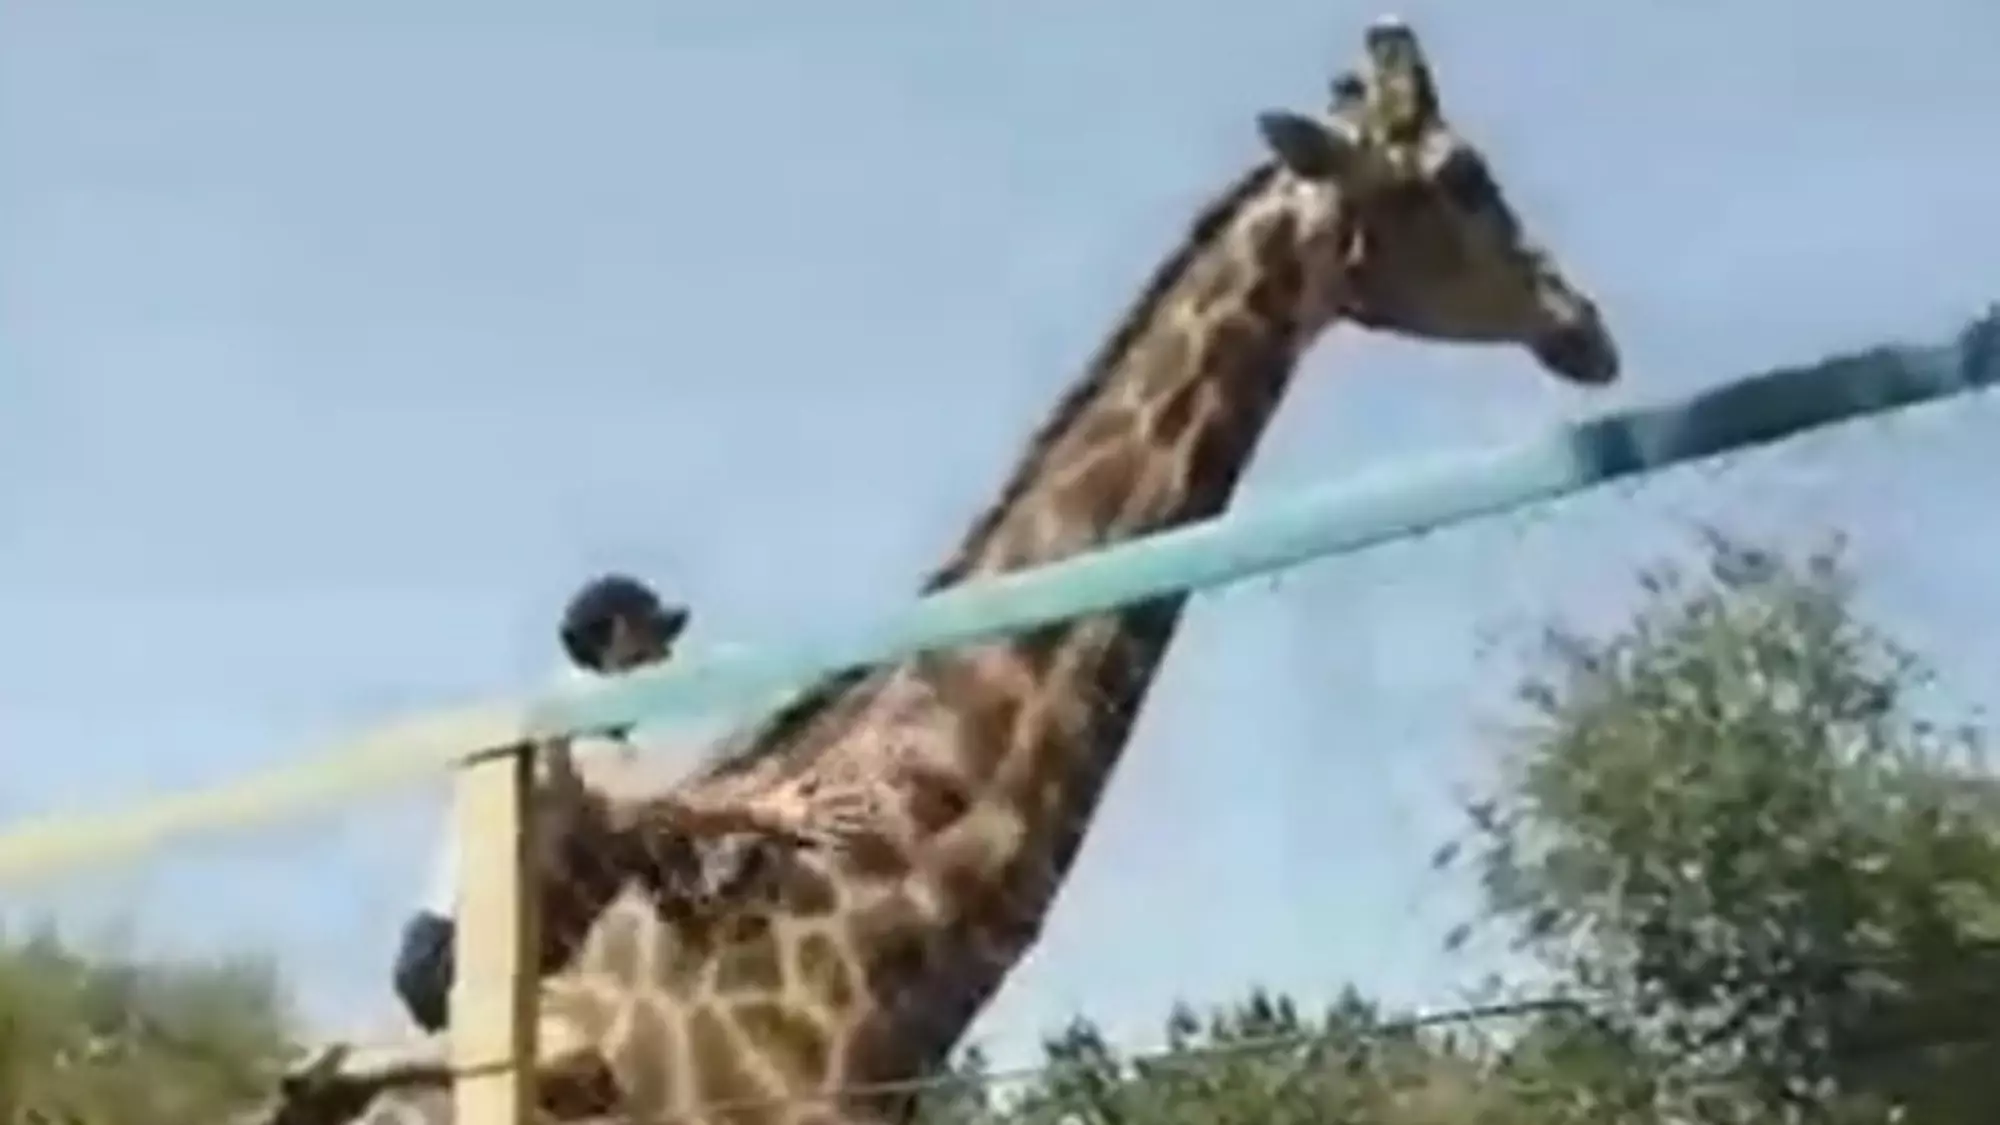 Man Leaps Over Fence To Ride Giraffe At Zoo In Kazakhstan